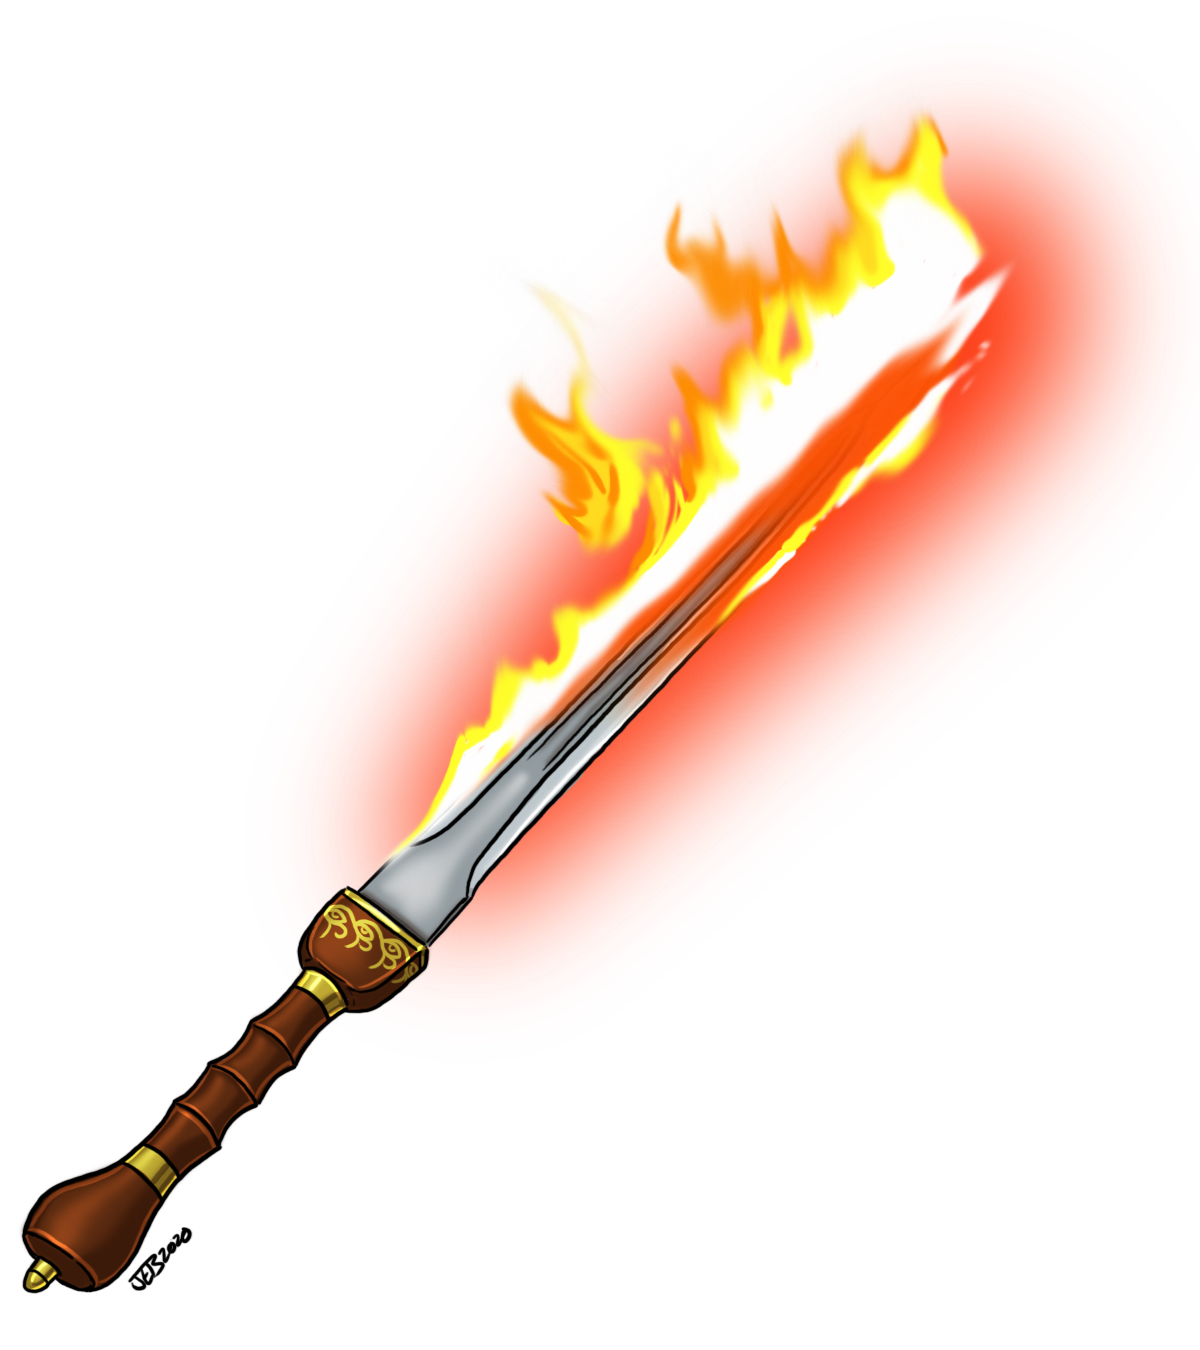 Flaming Sword by ProdigyDuck on DeviantArt